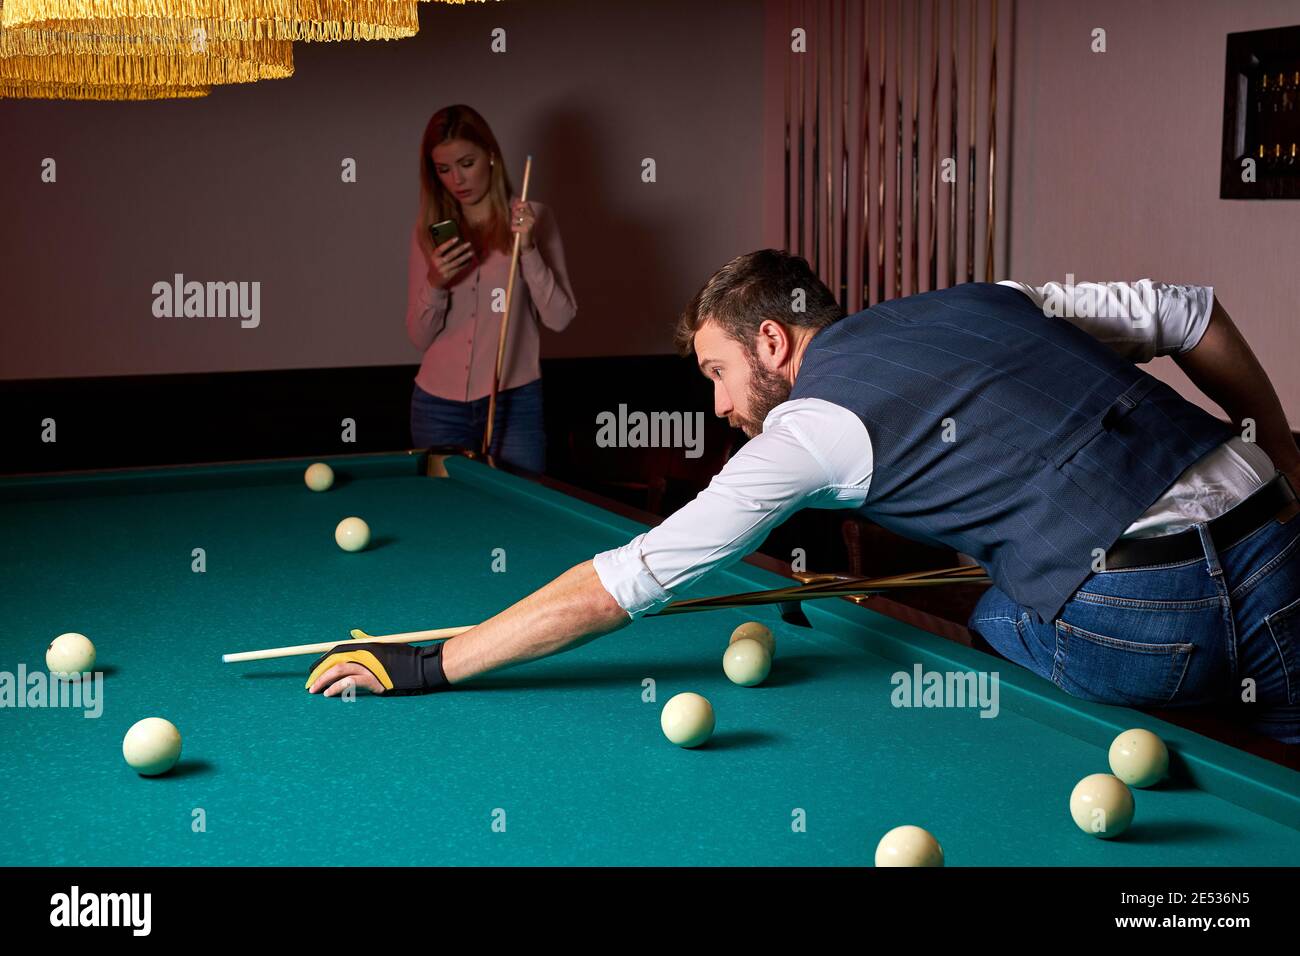 Billard Player High Resolution Stock Photography and Images - Alamy